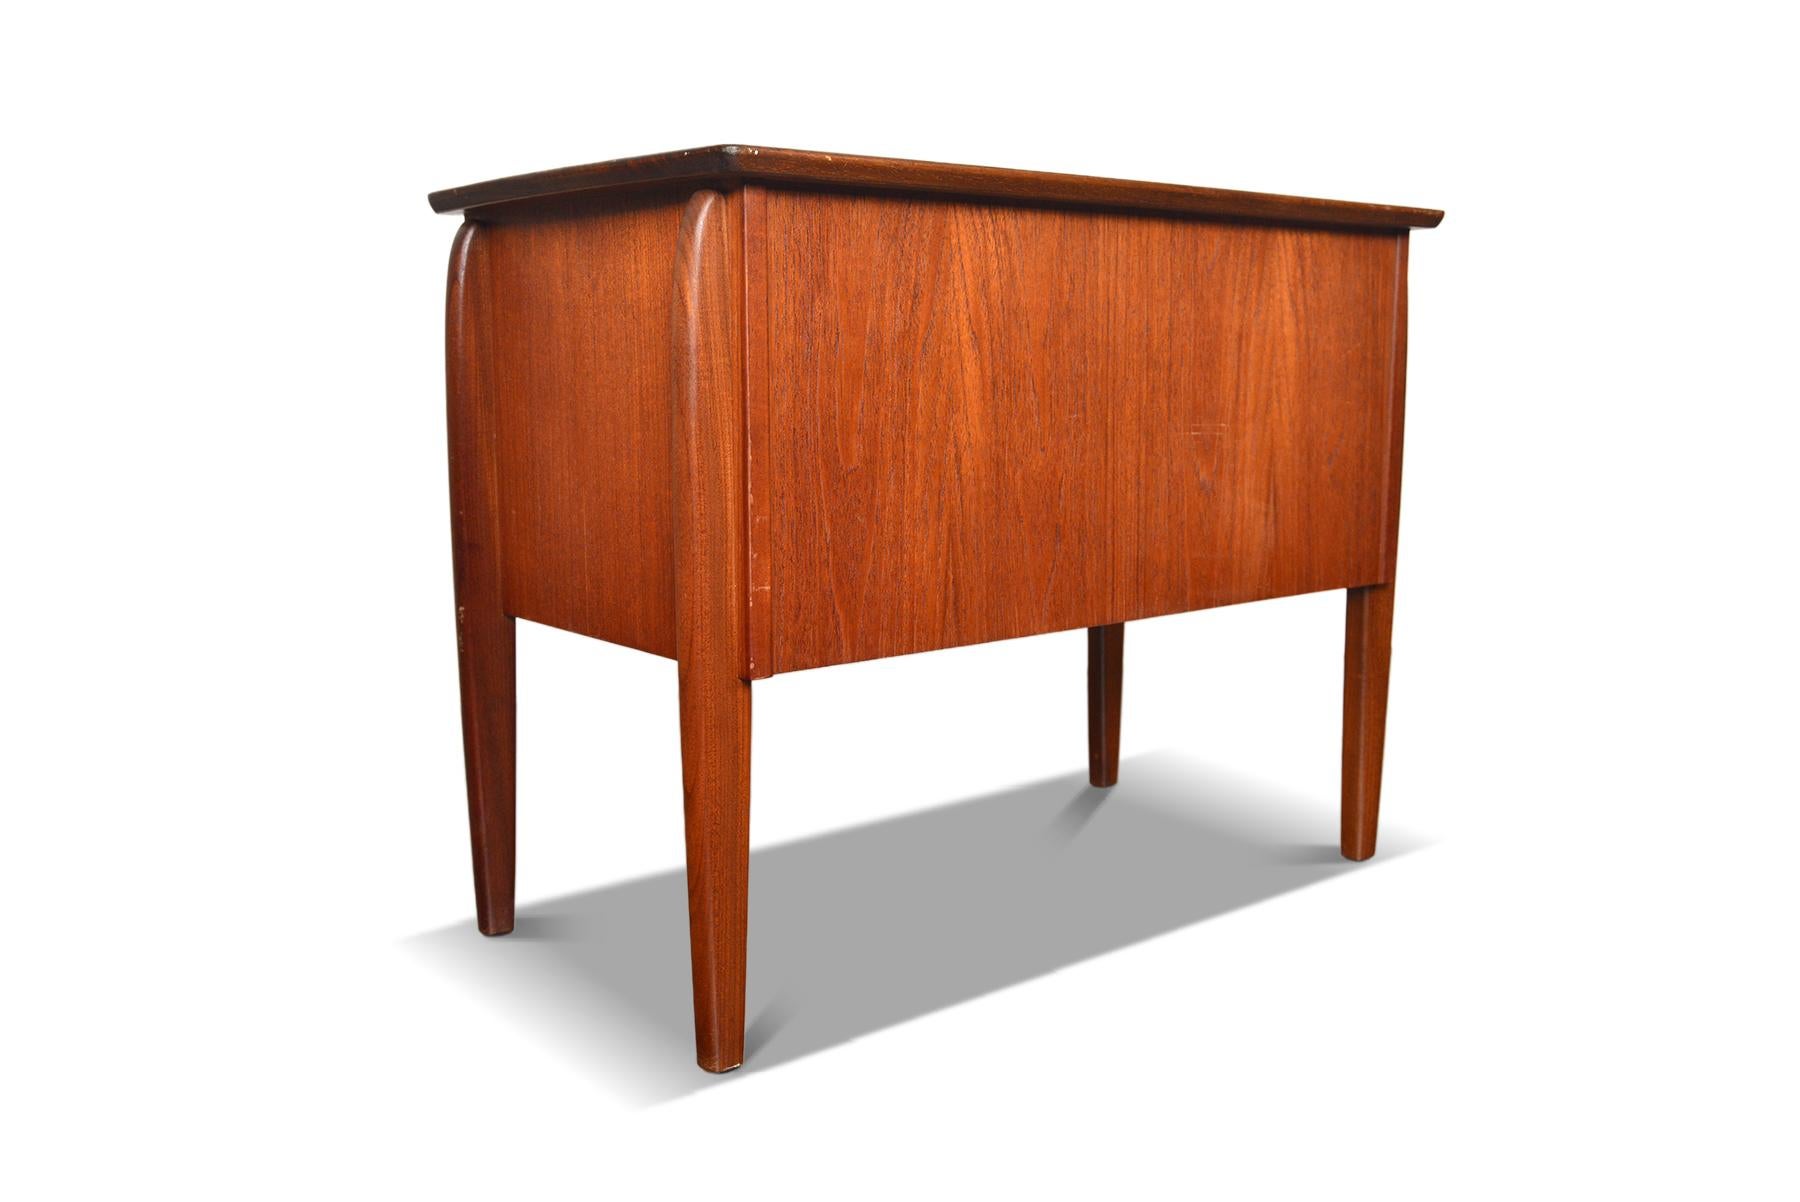 Origin: Denmark
Designer: Unknown
Manufacturer: Unknown
Era: 1960s
Materials: Teak
Measurements: 29.5″ wide x 16.5″ deep x 22.5″ tall

Condition: In excellent original condition with typical wear for its vintage.  Price includes a full exterior and